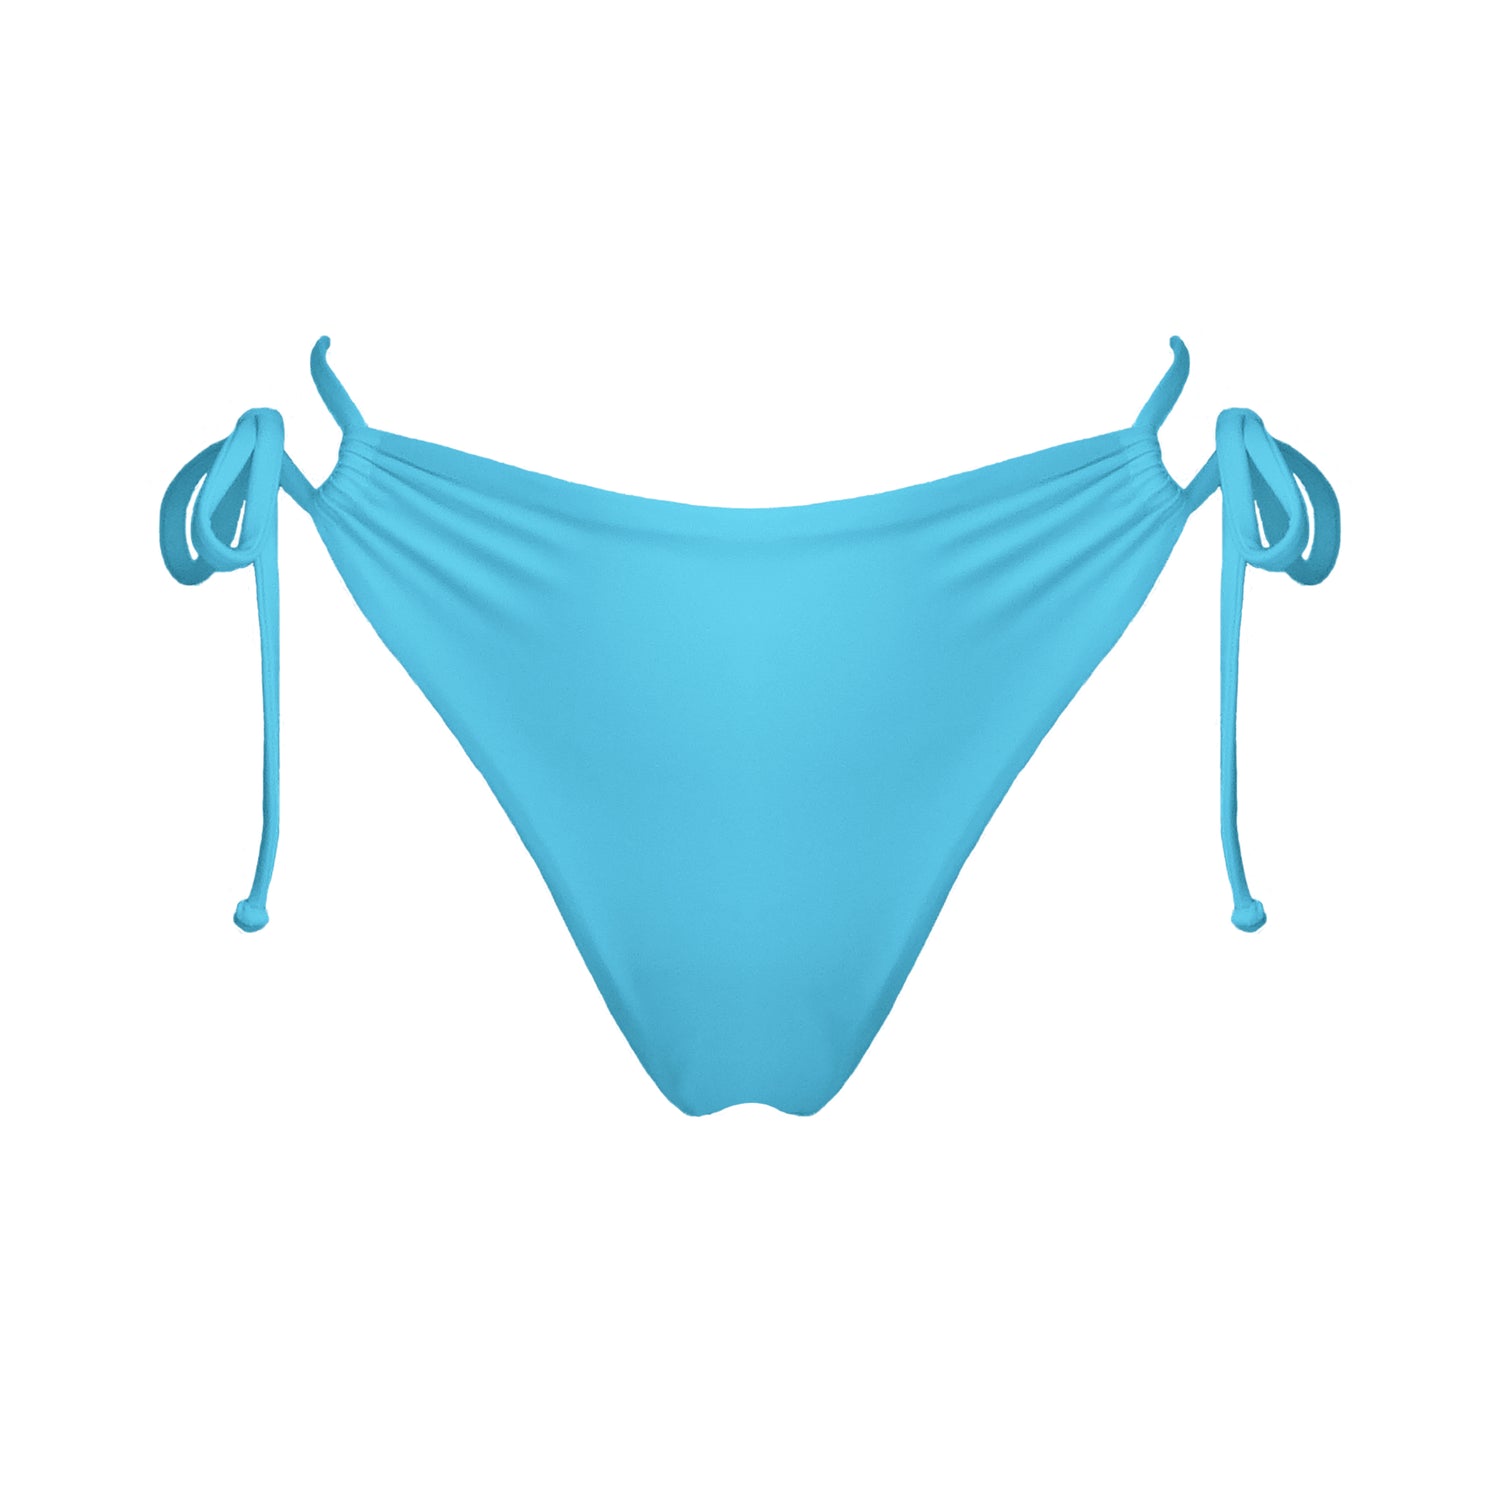 Acqua blue strappy mid-rise bikini bottoms with high cut legs and cheeky coverage.